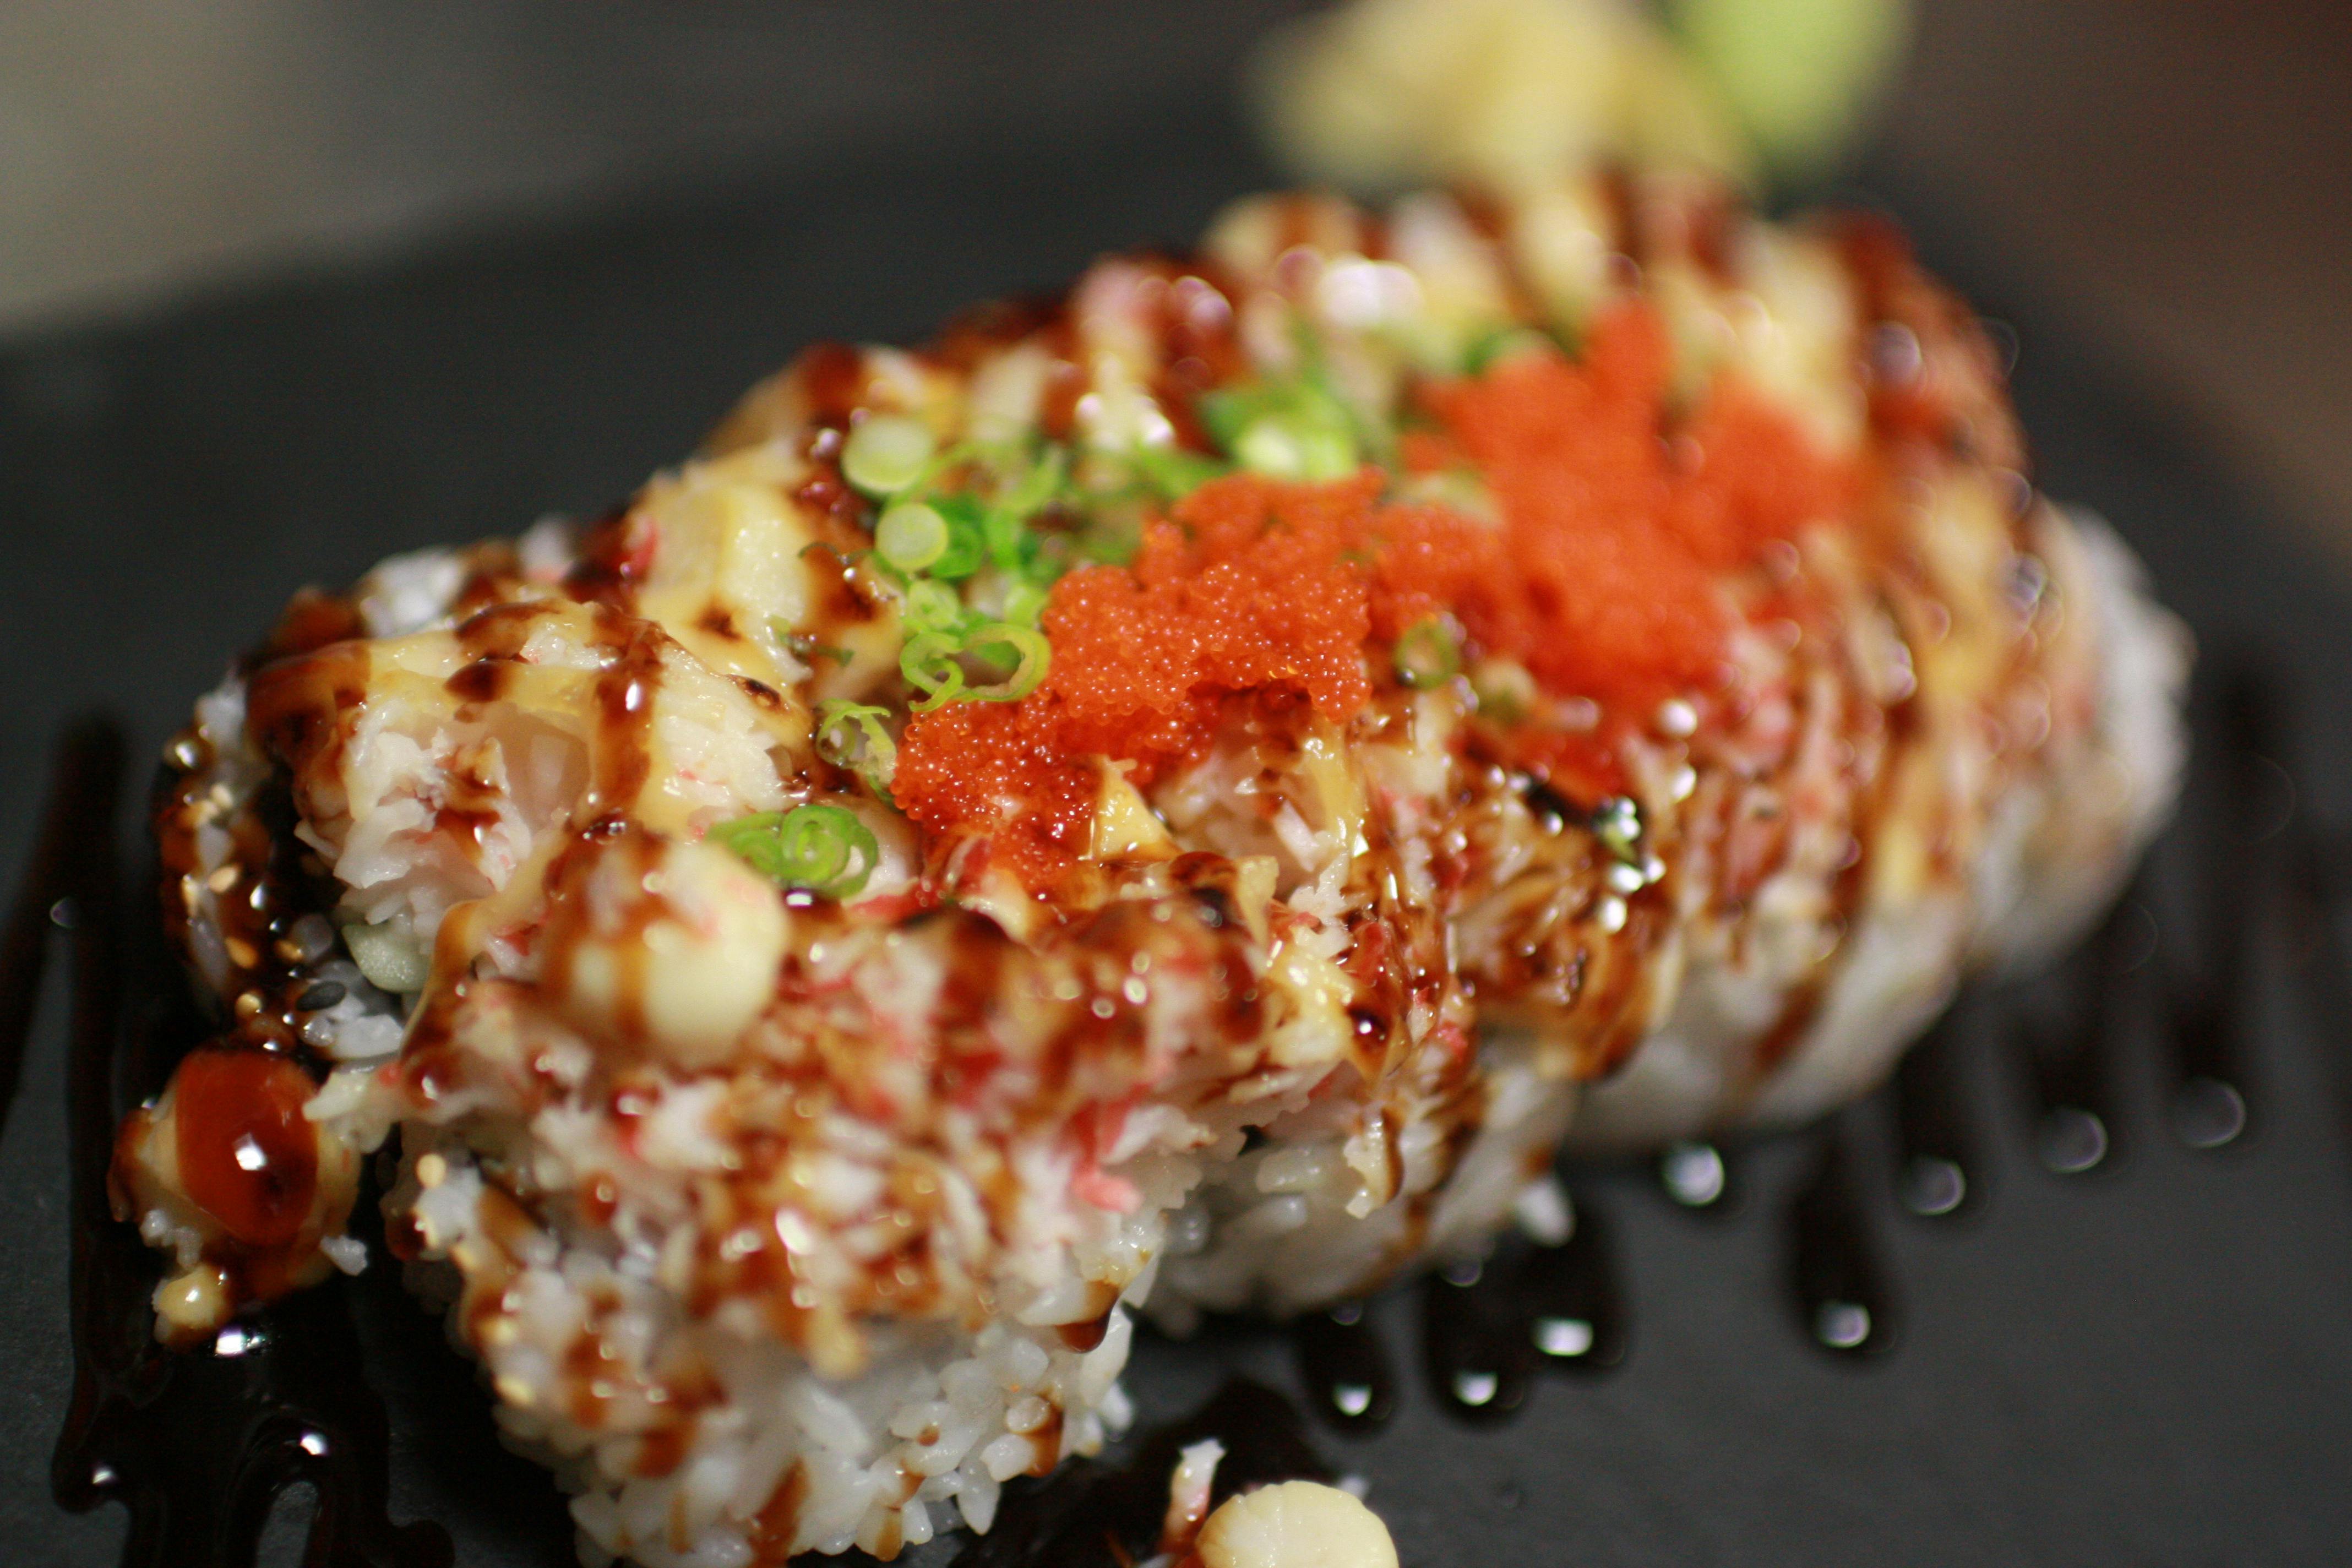 Baked Scallop Roll from Sequoia Ramen & Sushi Lounge in Madison, WI